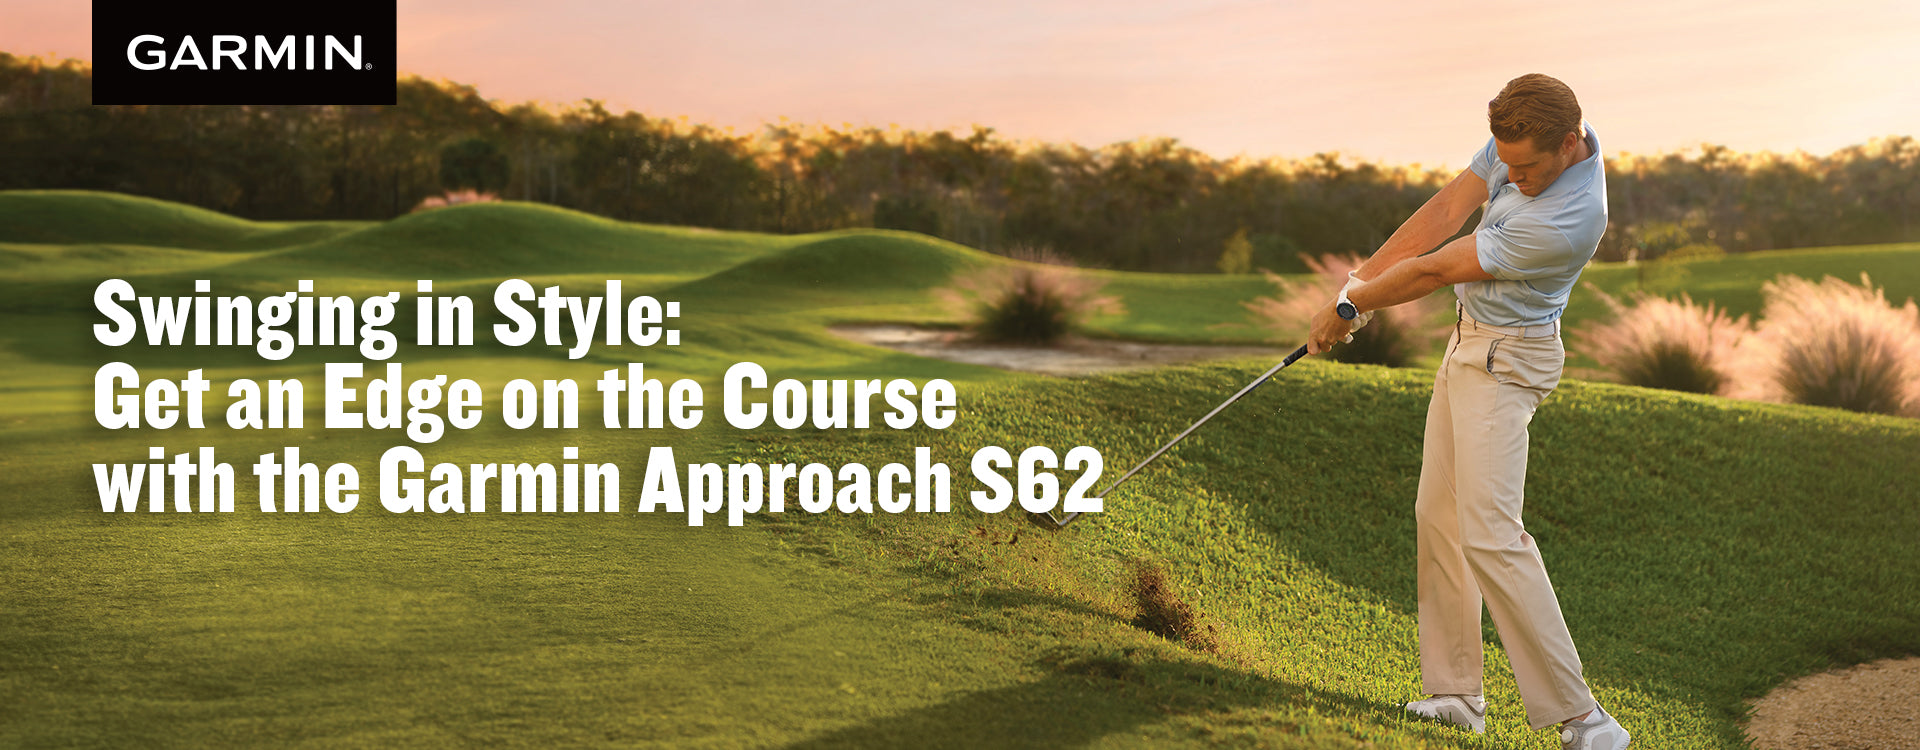 Swinging in Style: Get an Edge on the Course with the Garmin Approach S62